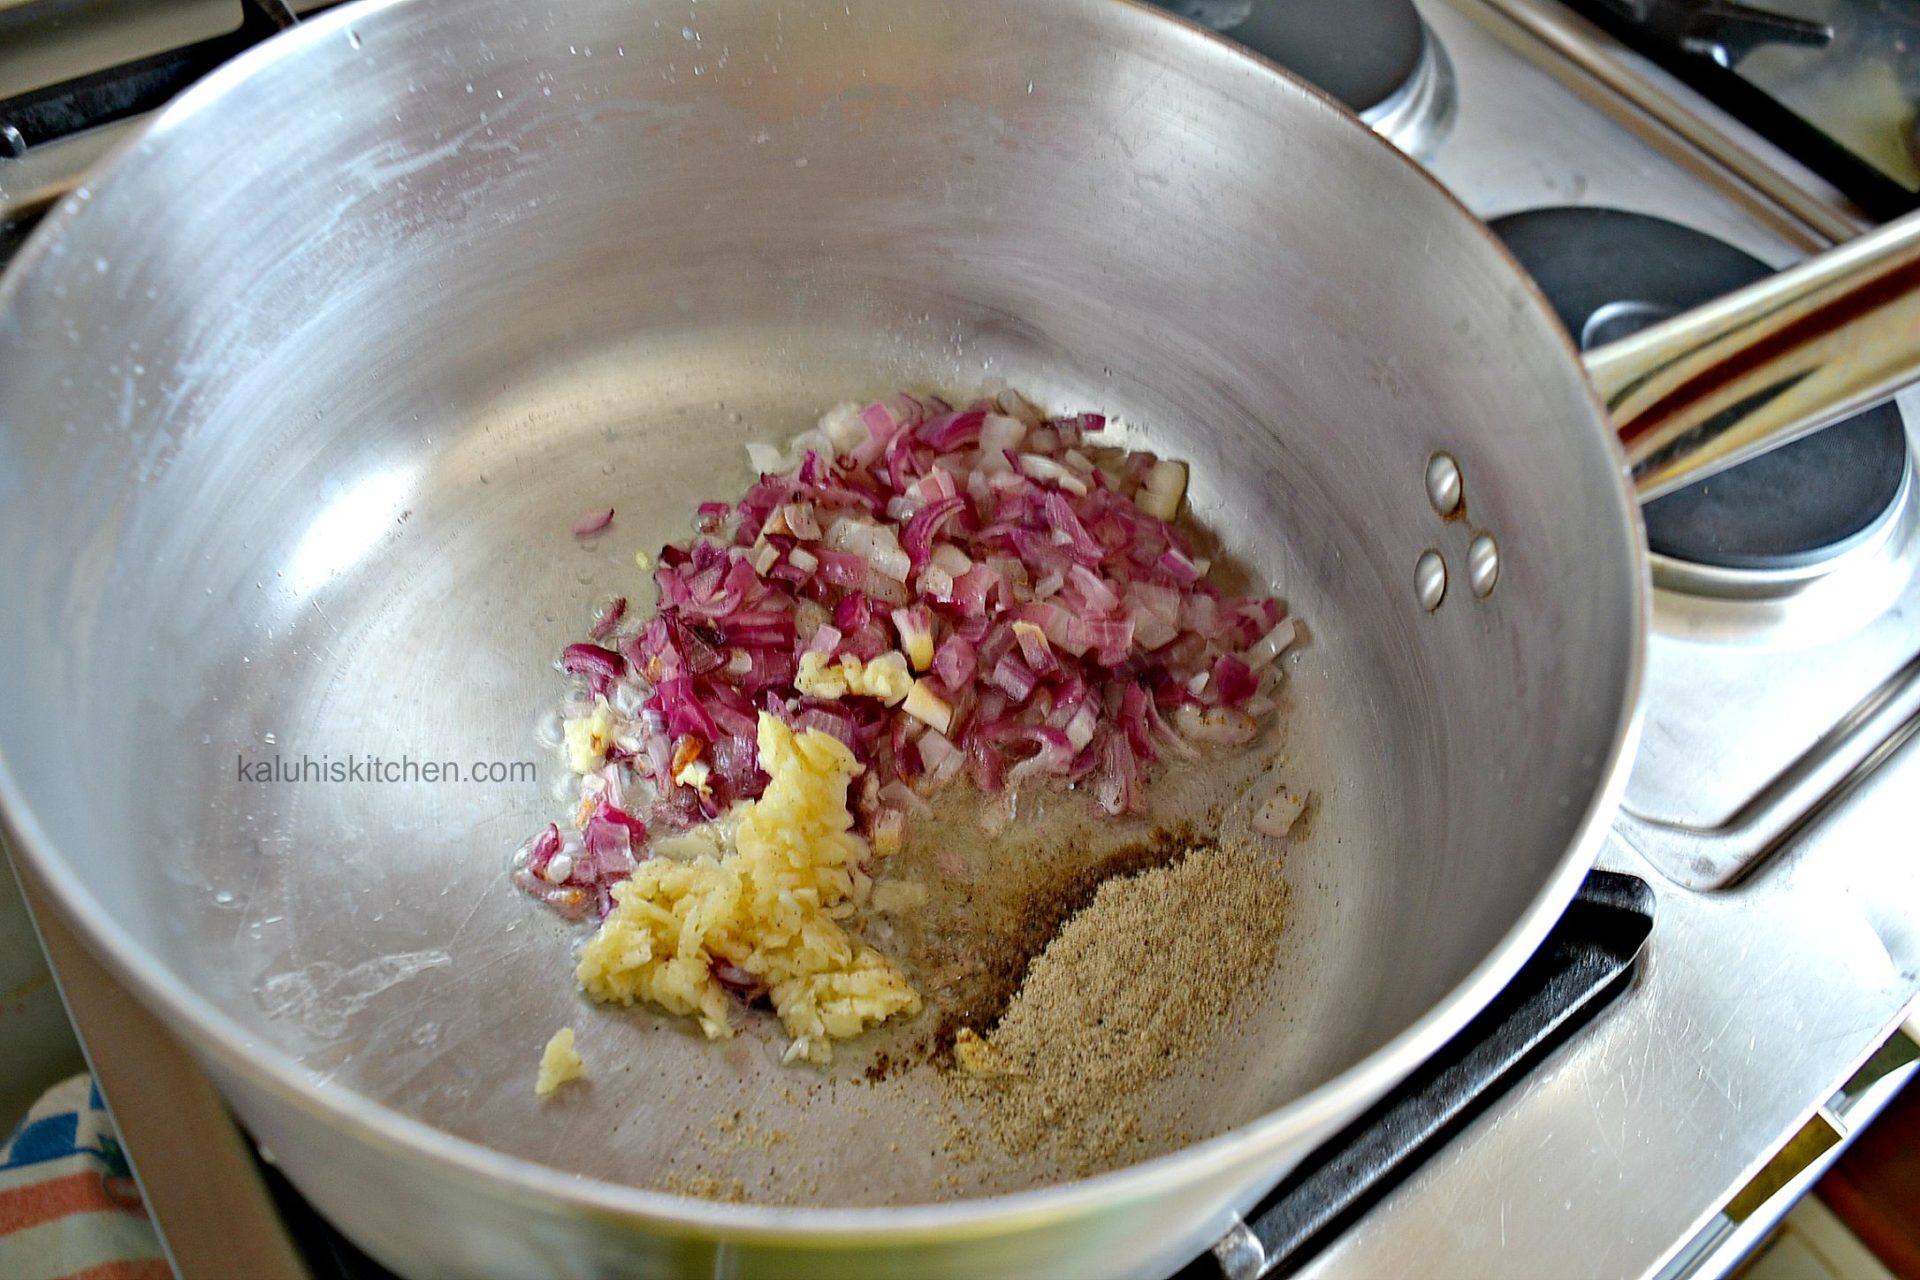 sauteeing the onion and garlic together with the spices allows everything to come together and all the flavors to meld_kaluhiskitchen.com